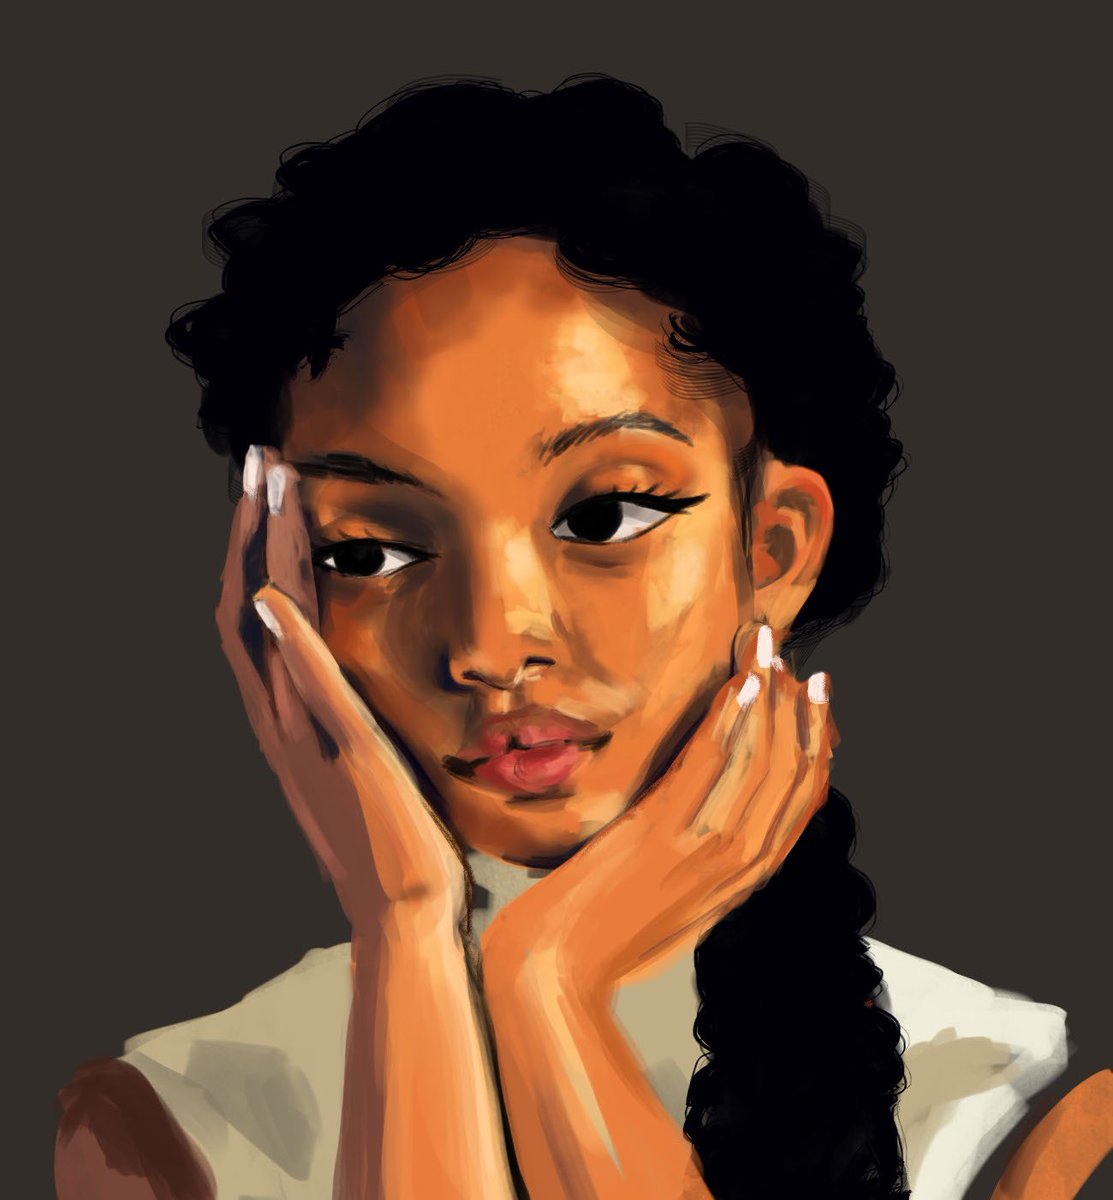 WIP #WIP don’t know how to draw hands and faces lol #artmoots any suggestions? #dailyart #photoshop #portrait #Pinterest #digitalart #digitalpainting #arttwt